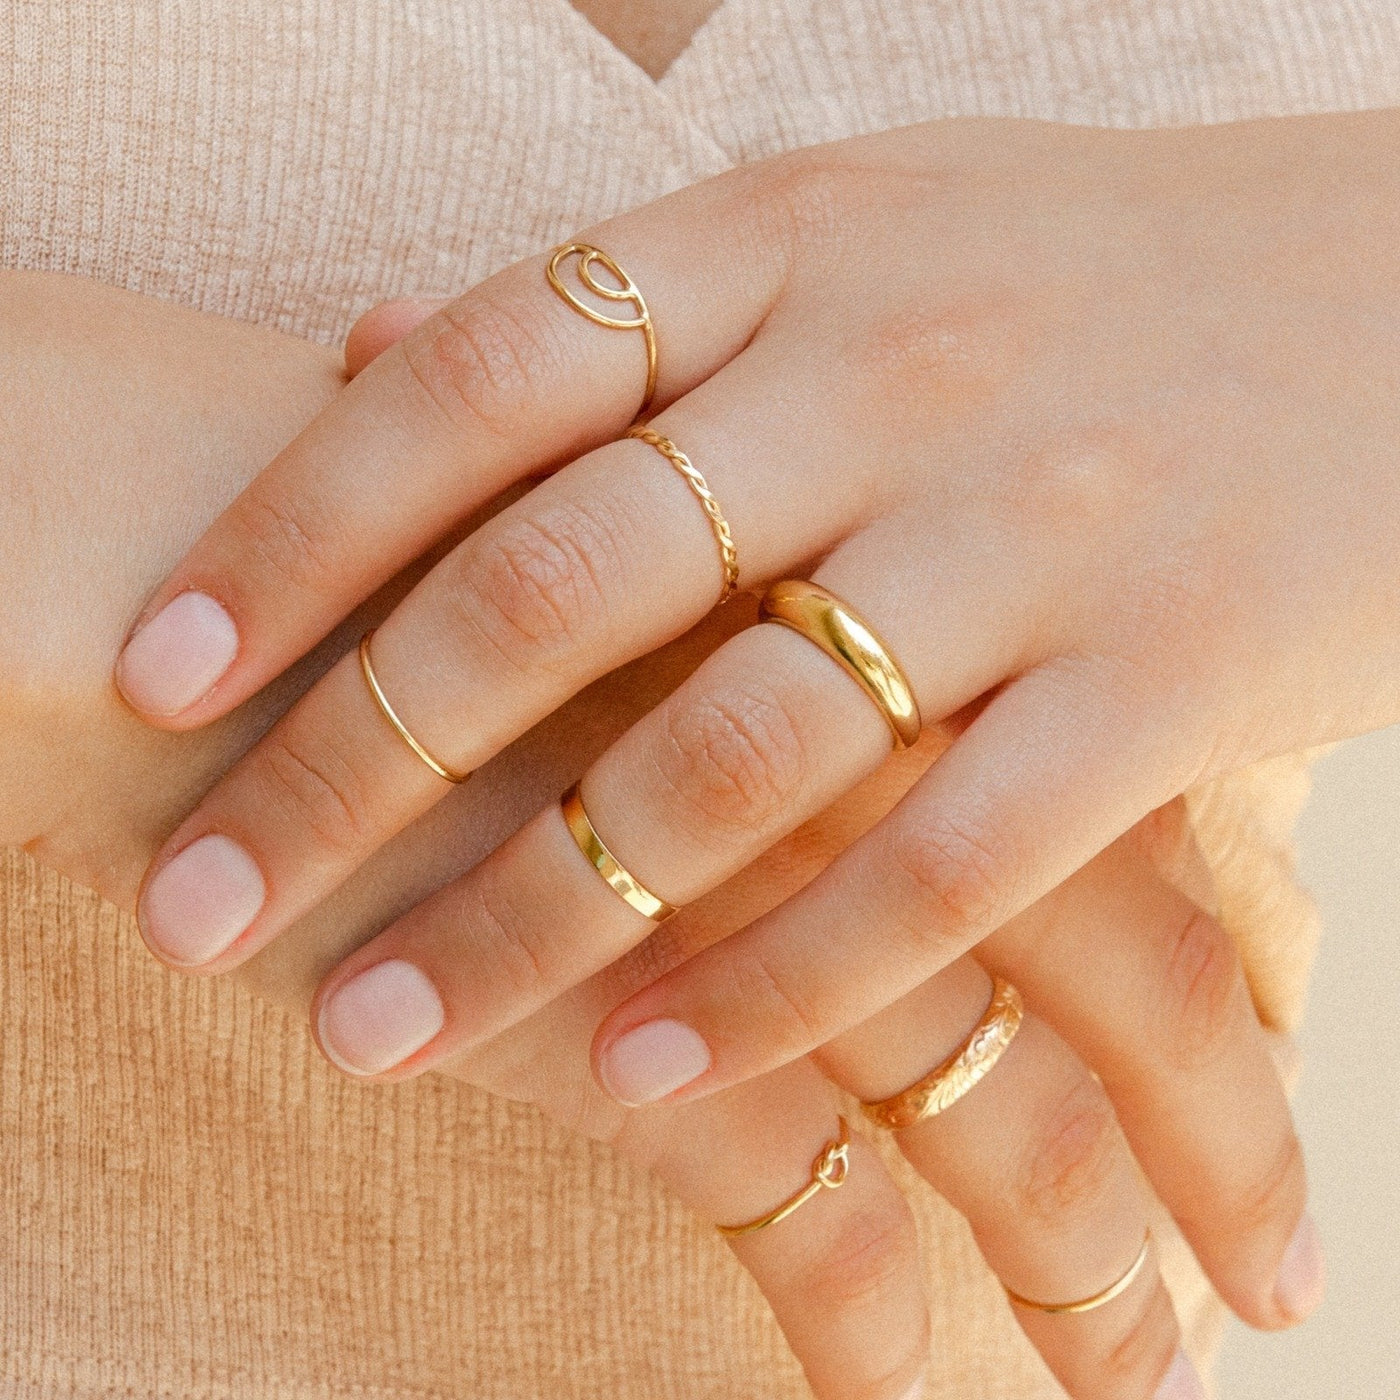 Flat Band Ring by Simple & Dainty Jewelry